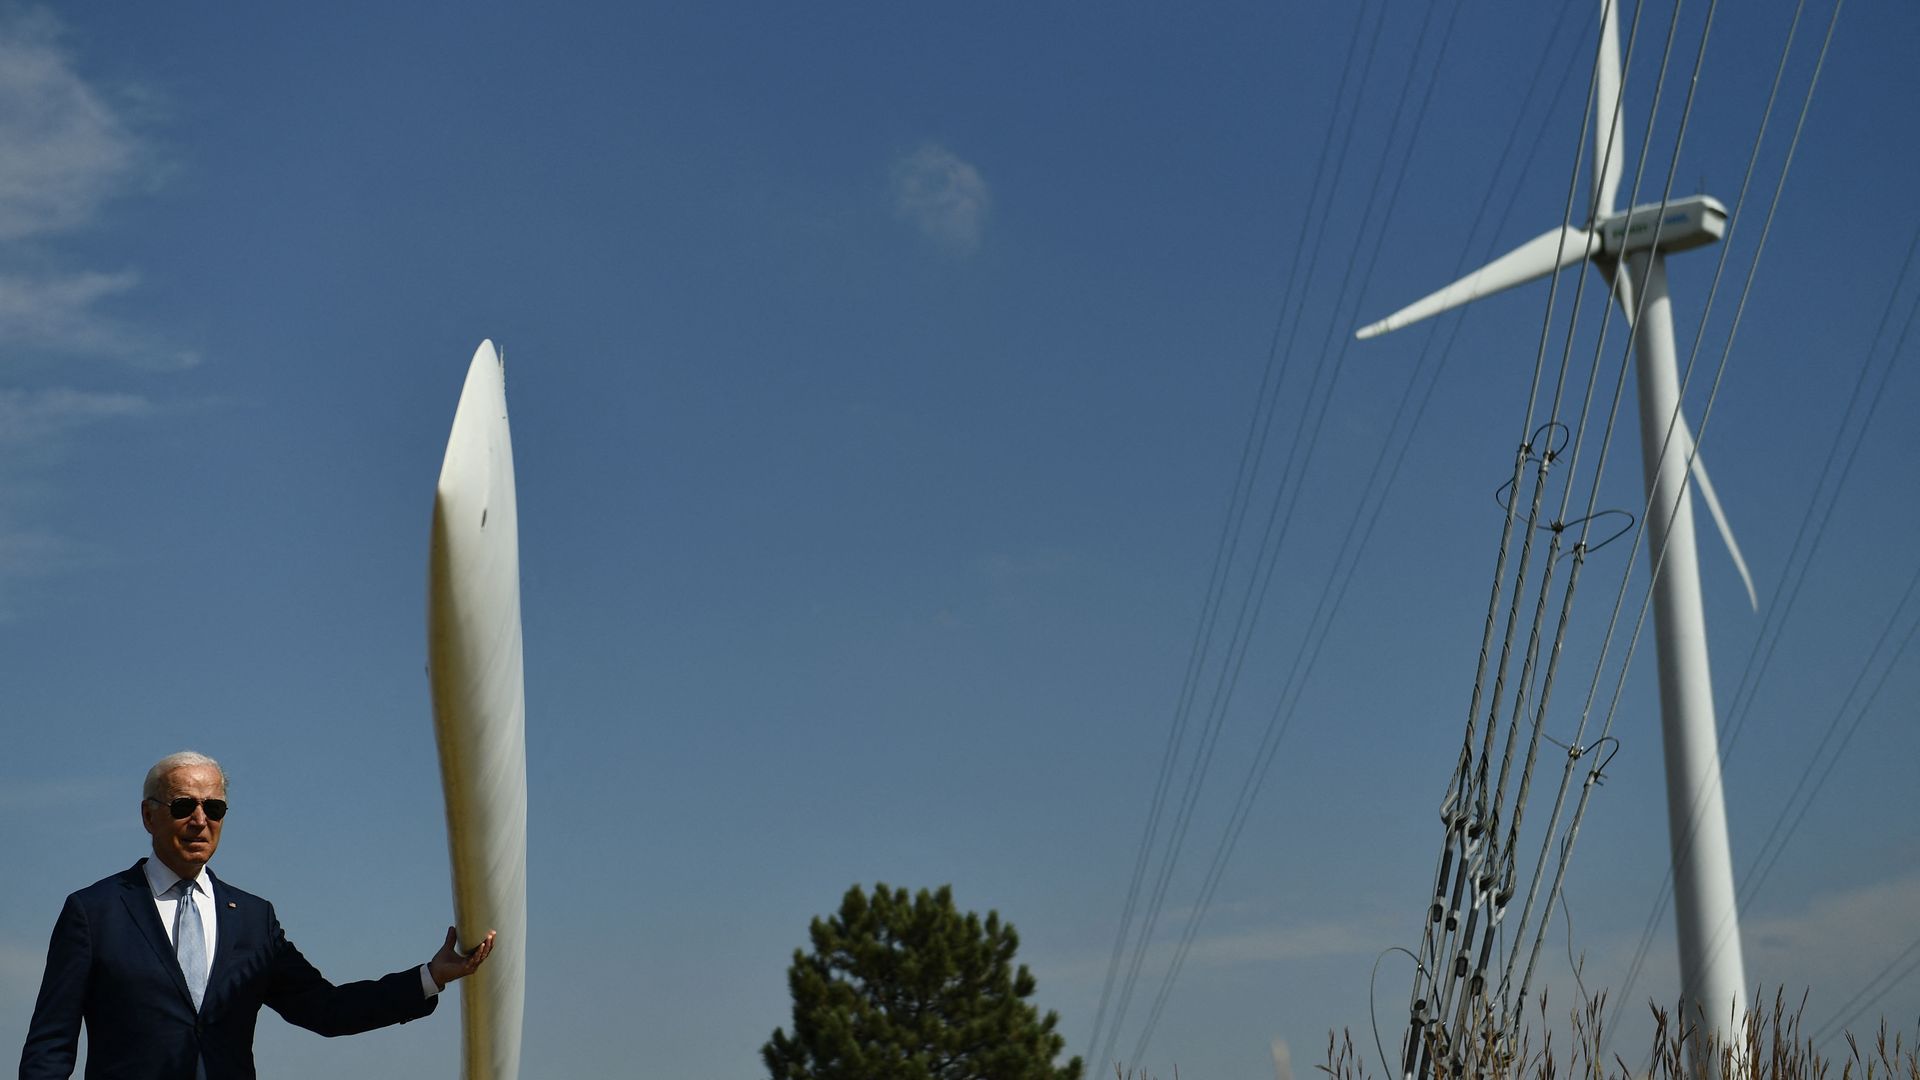 President Biden is seen feeling a wind turbine blade while visiting a clean energy site in Colorado.